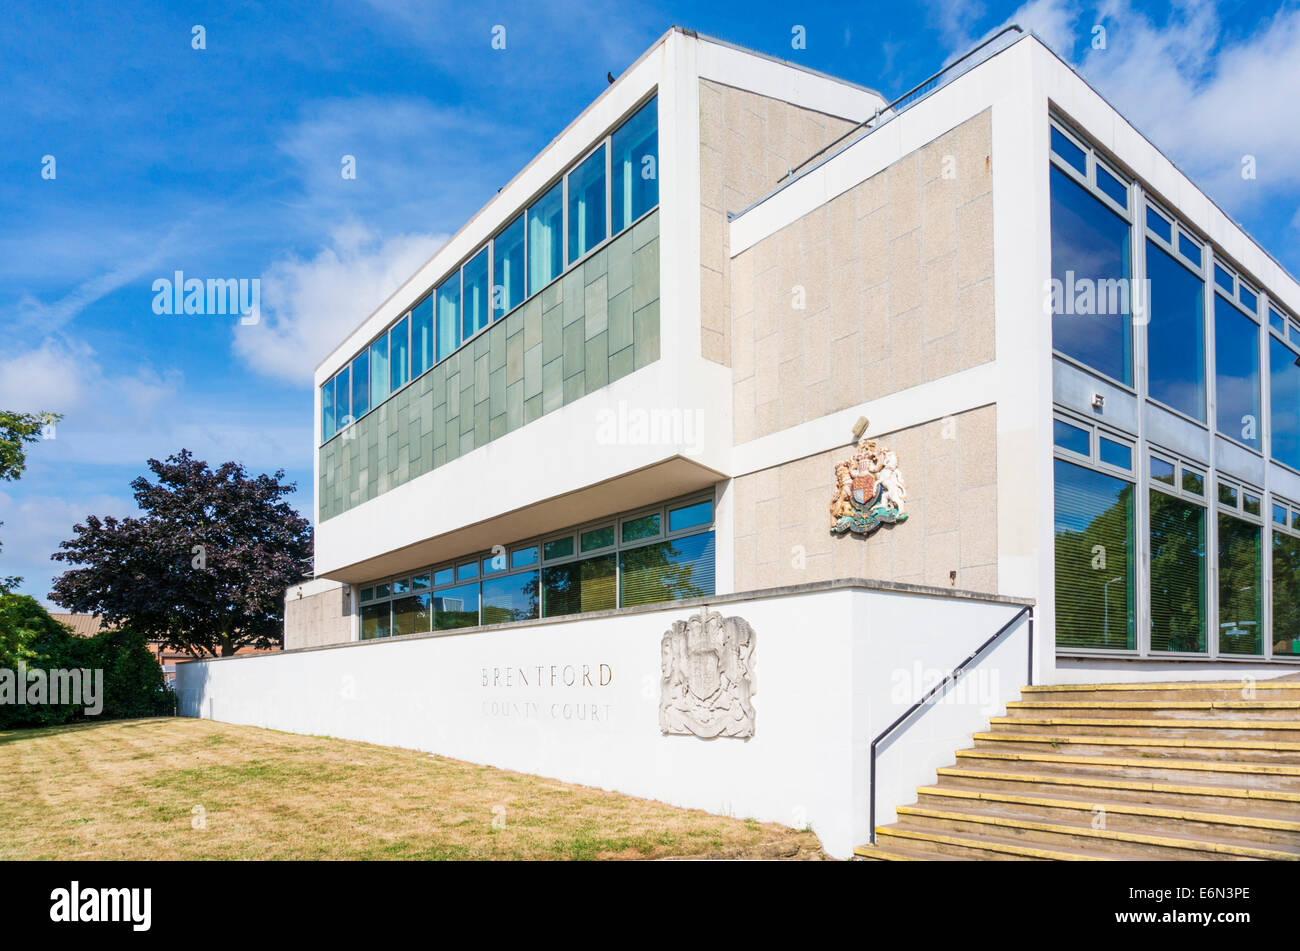 Brentford County Court and Family Court Brentford MIddlesex West London UK GB EU Europe Stock Photo